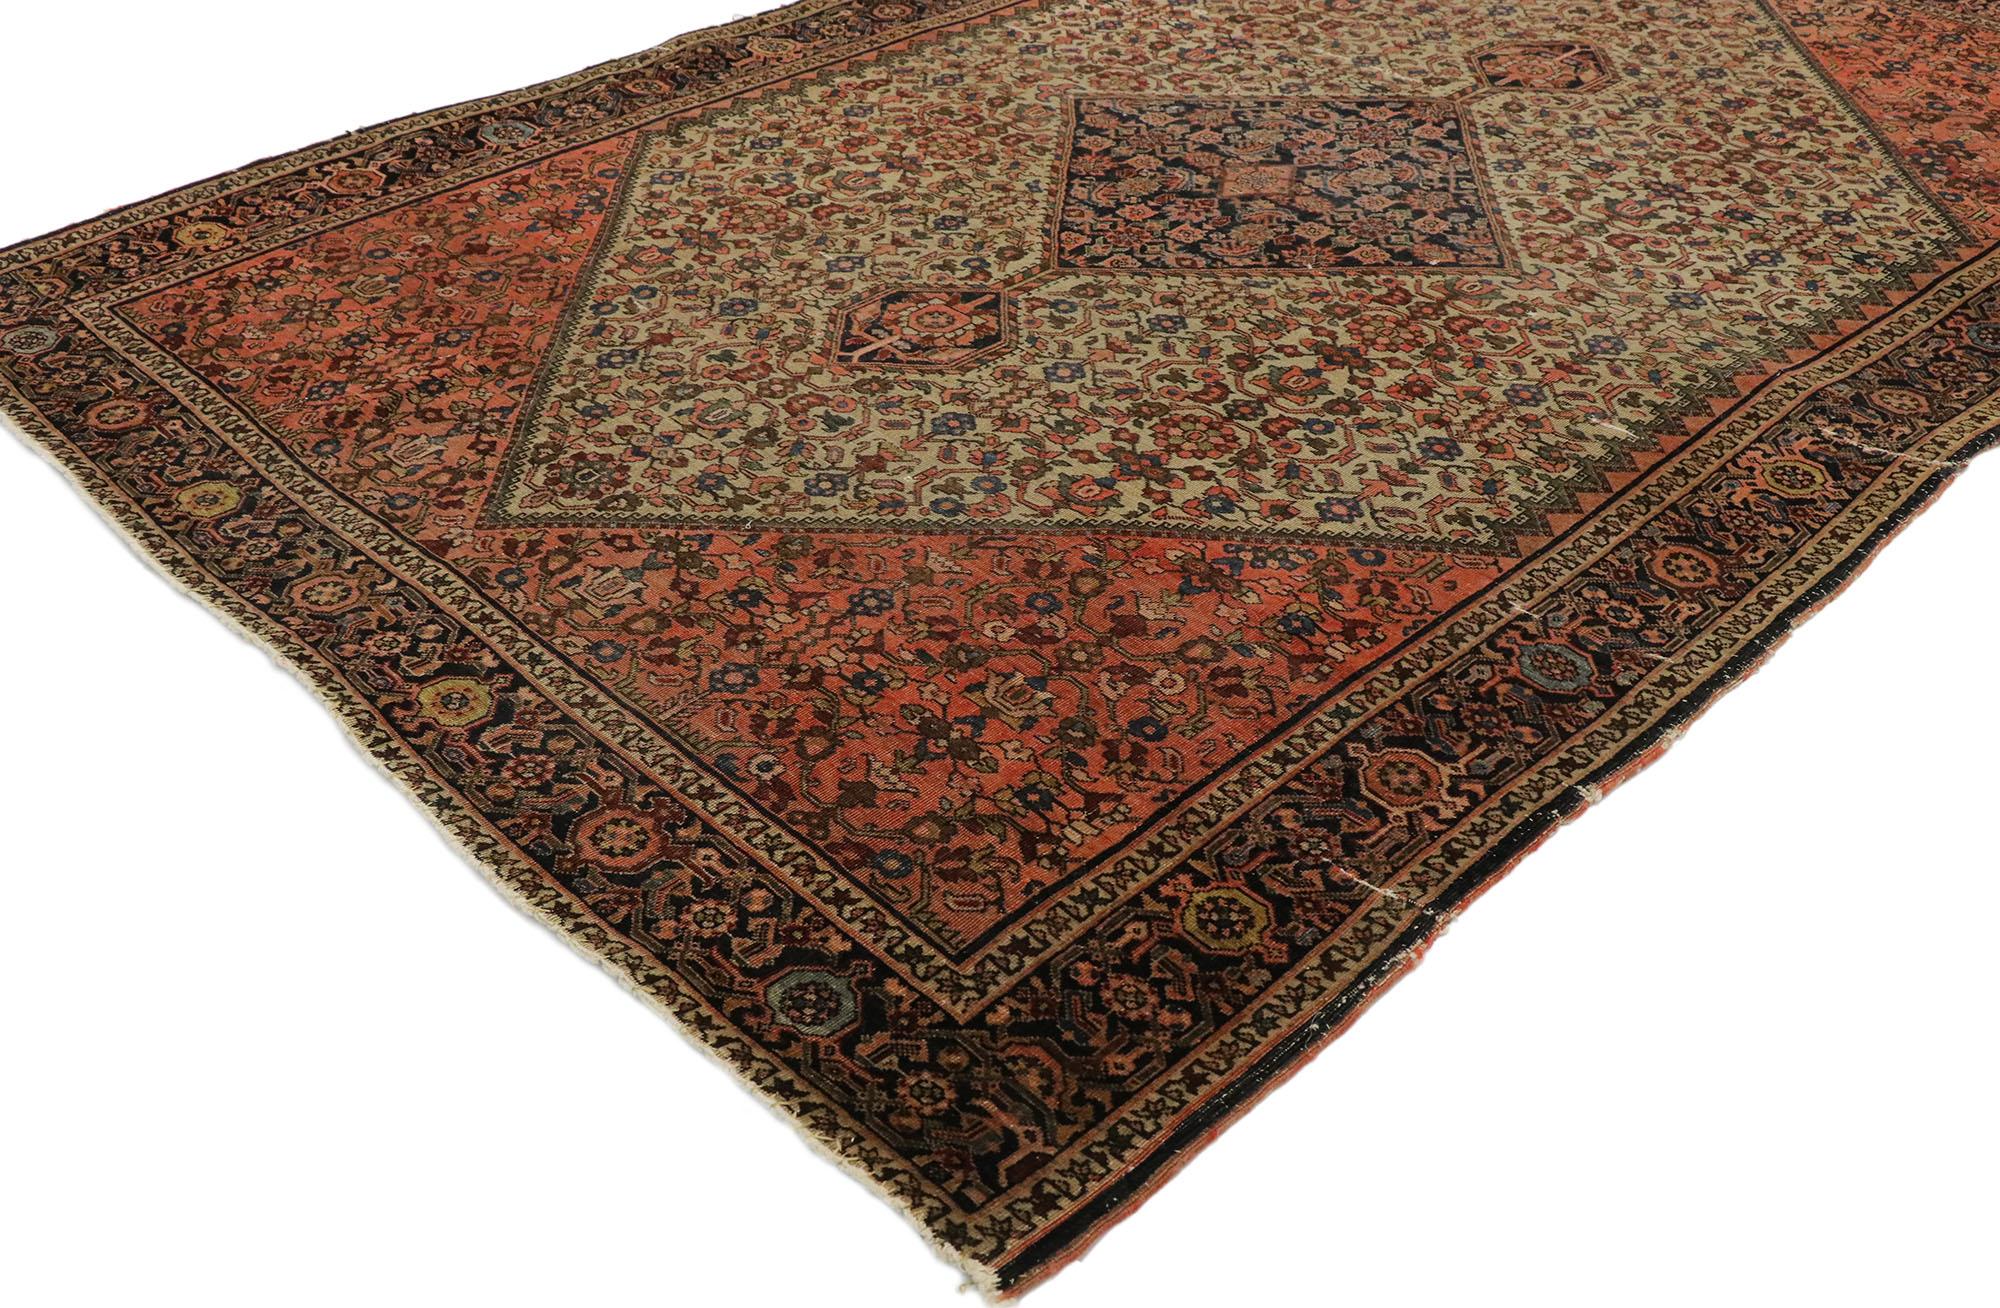 77530, distressed antique Persian Farahan rug withy rustic craftsman style. With its geometric pattern and lovingly time-worn composition, this hand knotted wool distressed antique Persian Farahan rug embodies a rustic craftsman style. The weathered